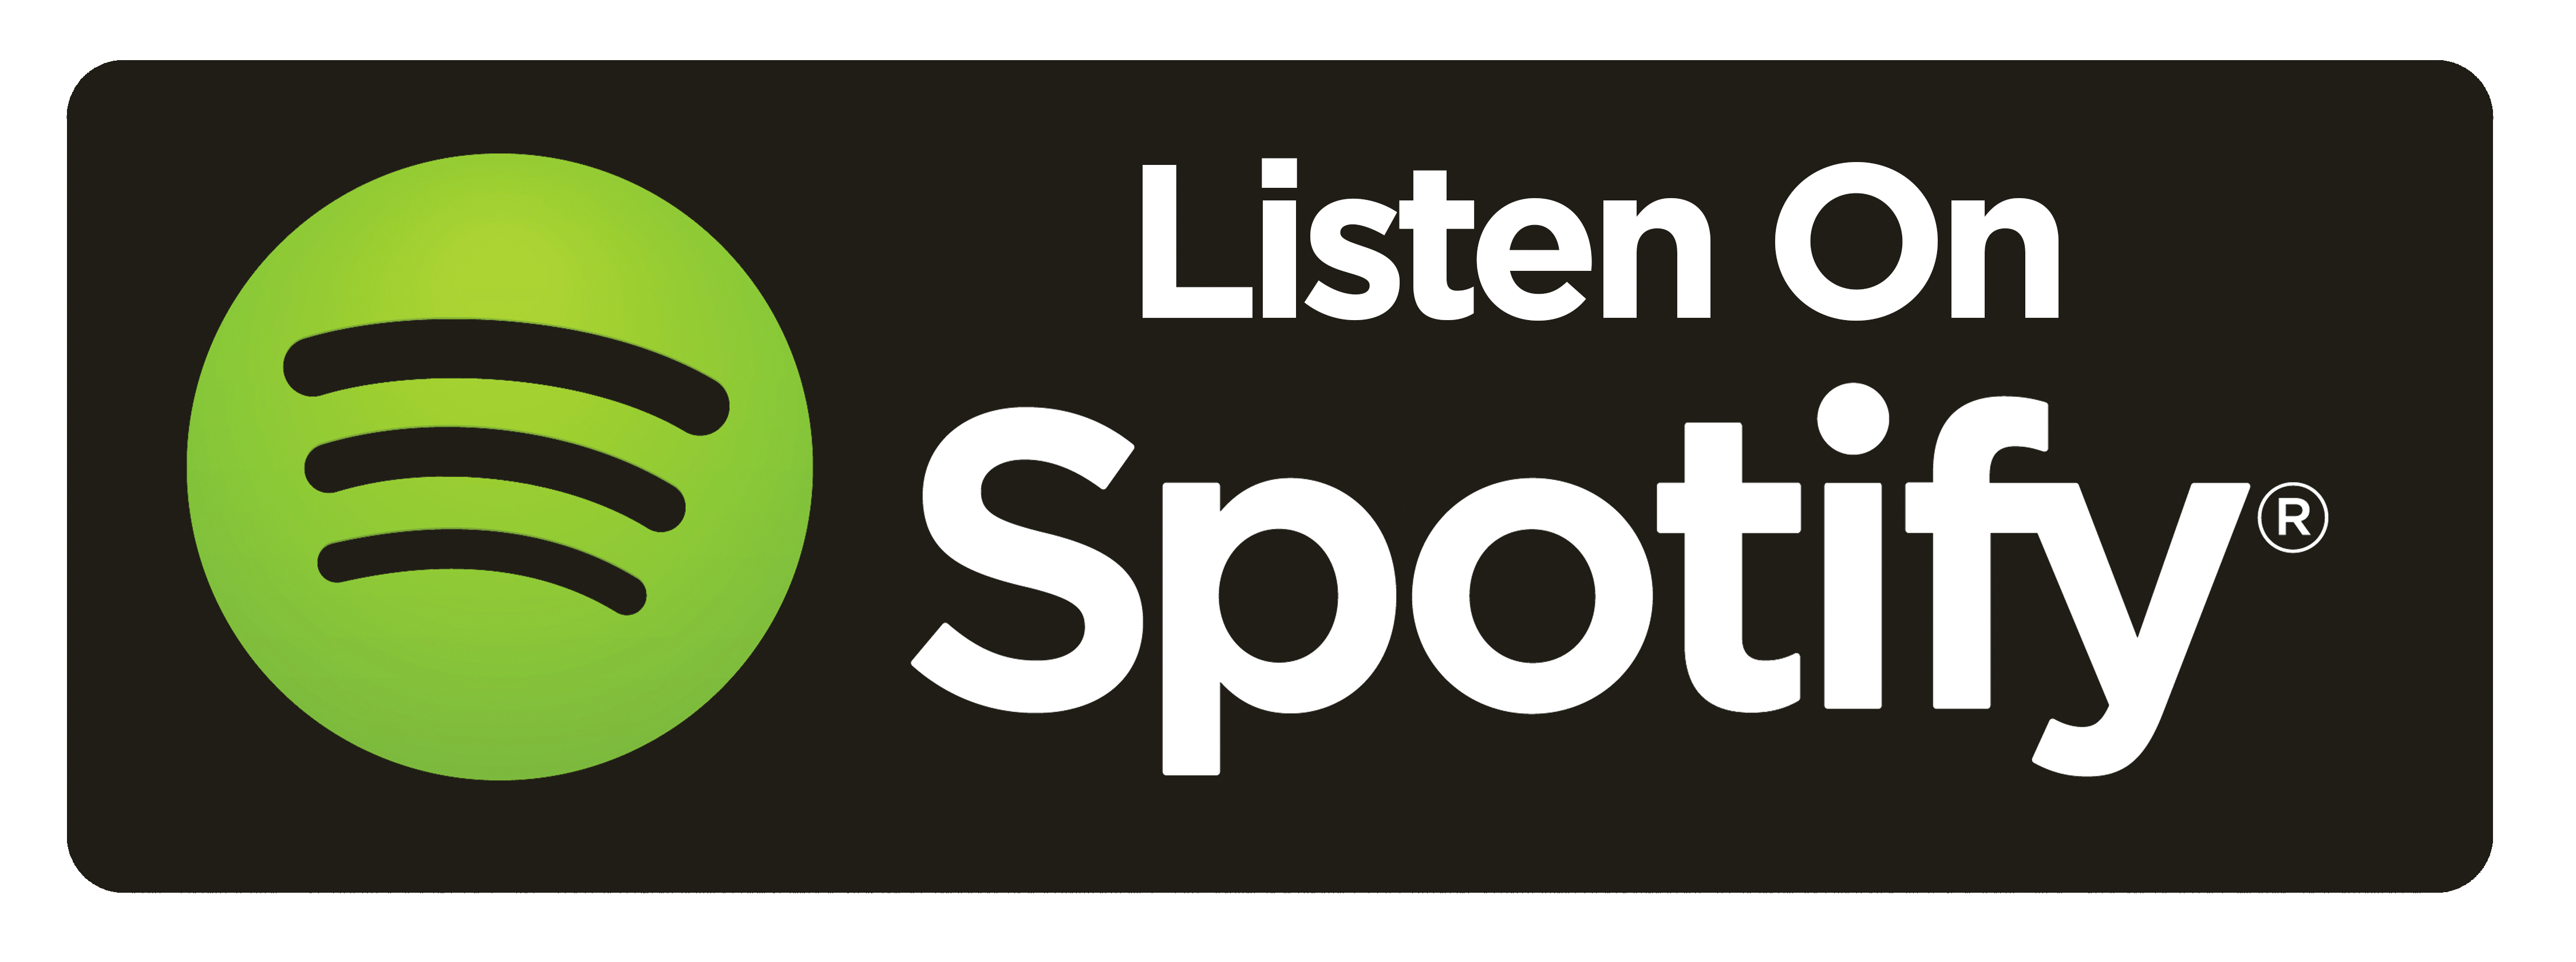 spotify podcasts for kids